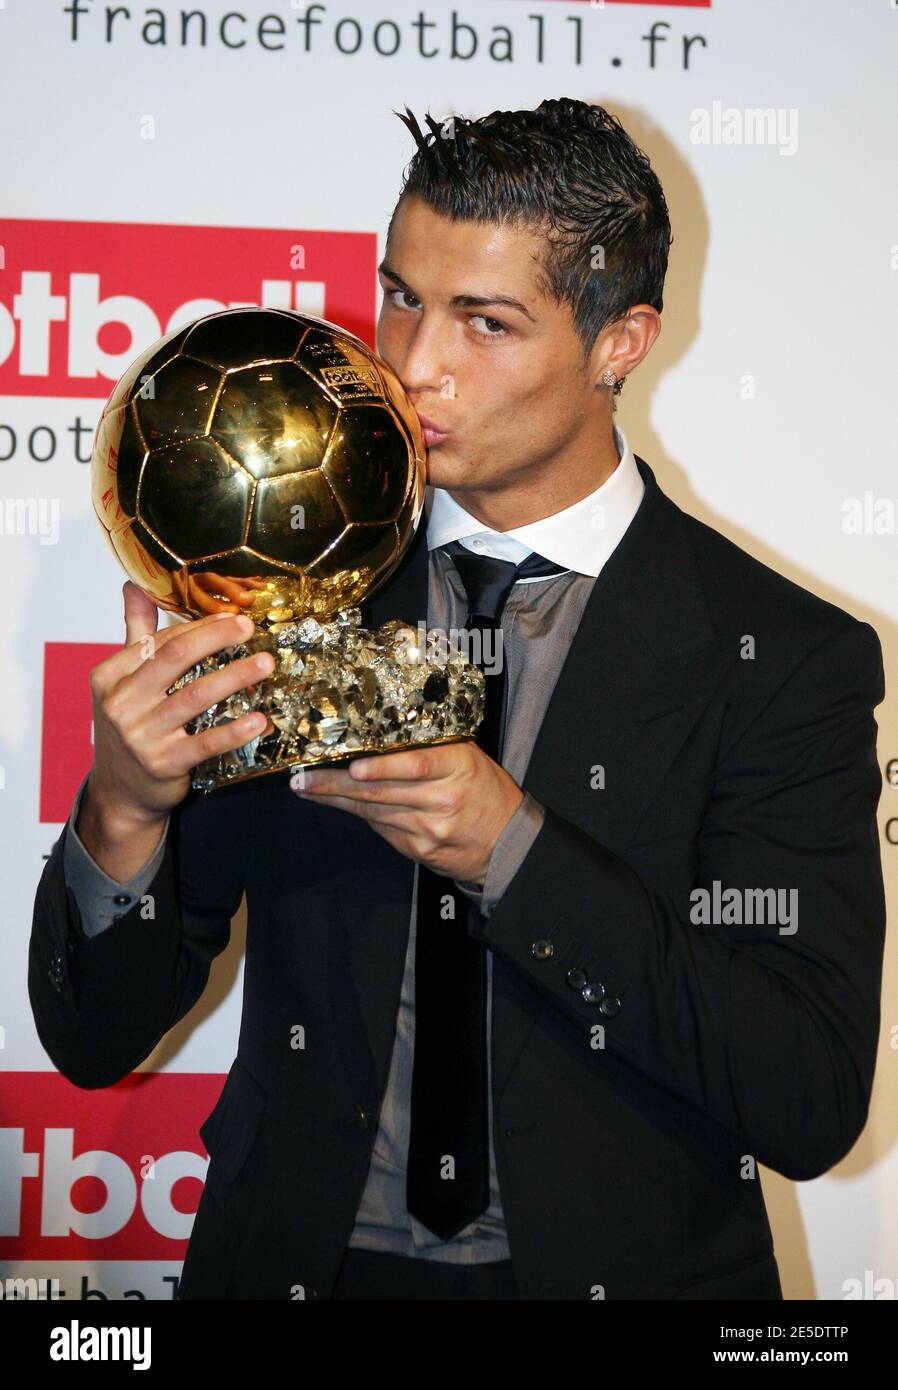 Portgual's Cristiano Ronaldo holds the 'Ballon D'Or France Football' Trophy  during press conference after french television TF1 football show.  Ronaldo's familly was there with Manchester United manager's Sir Alex  Ferguson. In Issy-les-Moulineaux